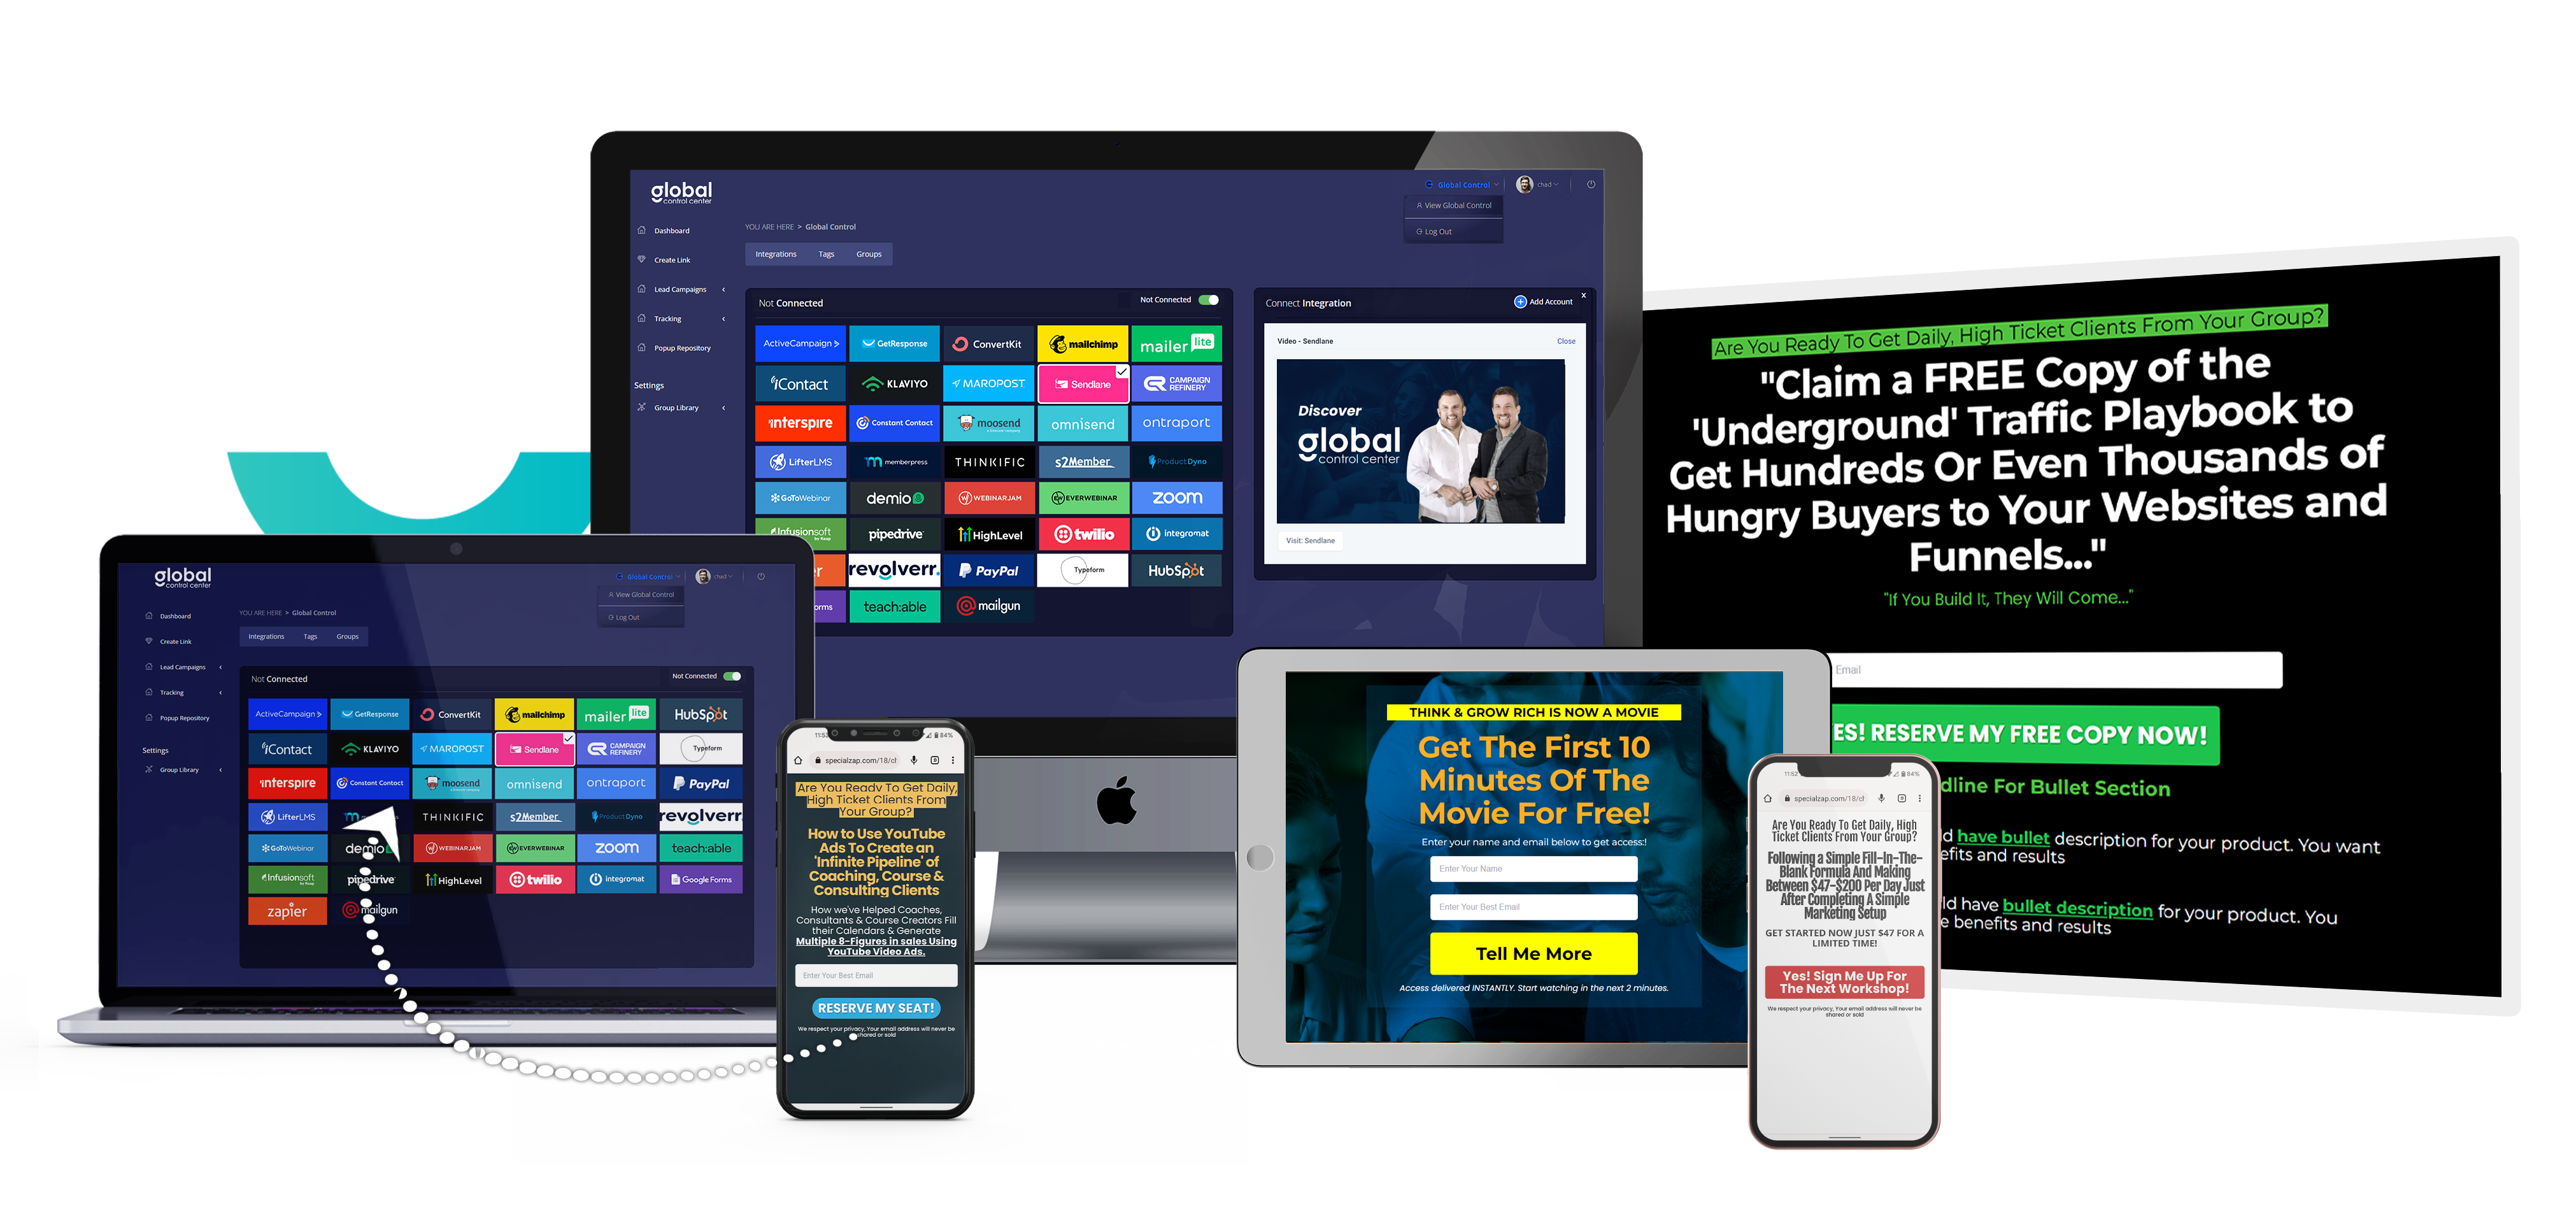 PopLinks Review – Best #1 app Creates BEAUTIFUL 2.0 LANDING PAGES IN 60 SECONDS! Finally, Discover How To Build Over 100+ Landing Pages, Sales Pages or Bridge Pages in Less Than a MINUTE! Without Coding, Design or Even Any Copywriting Skills!